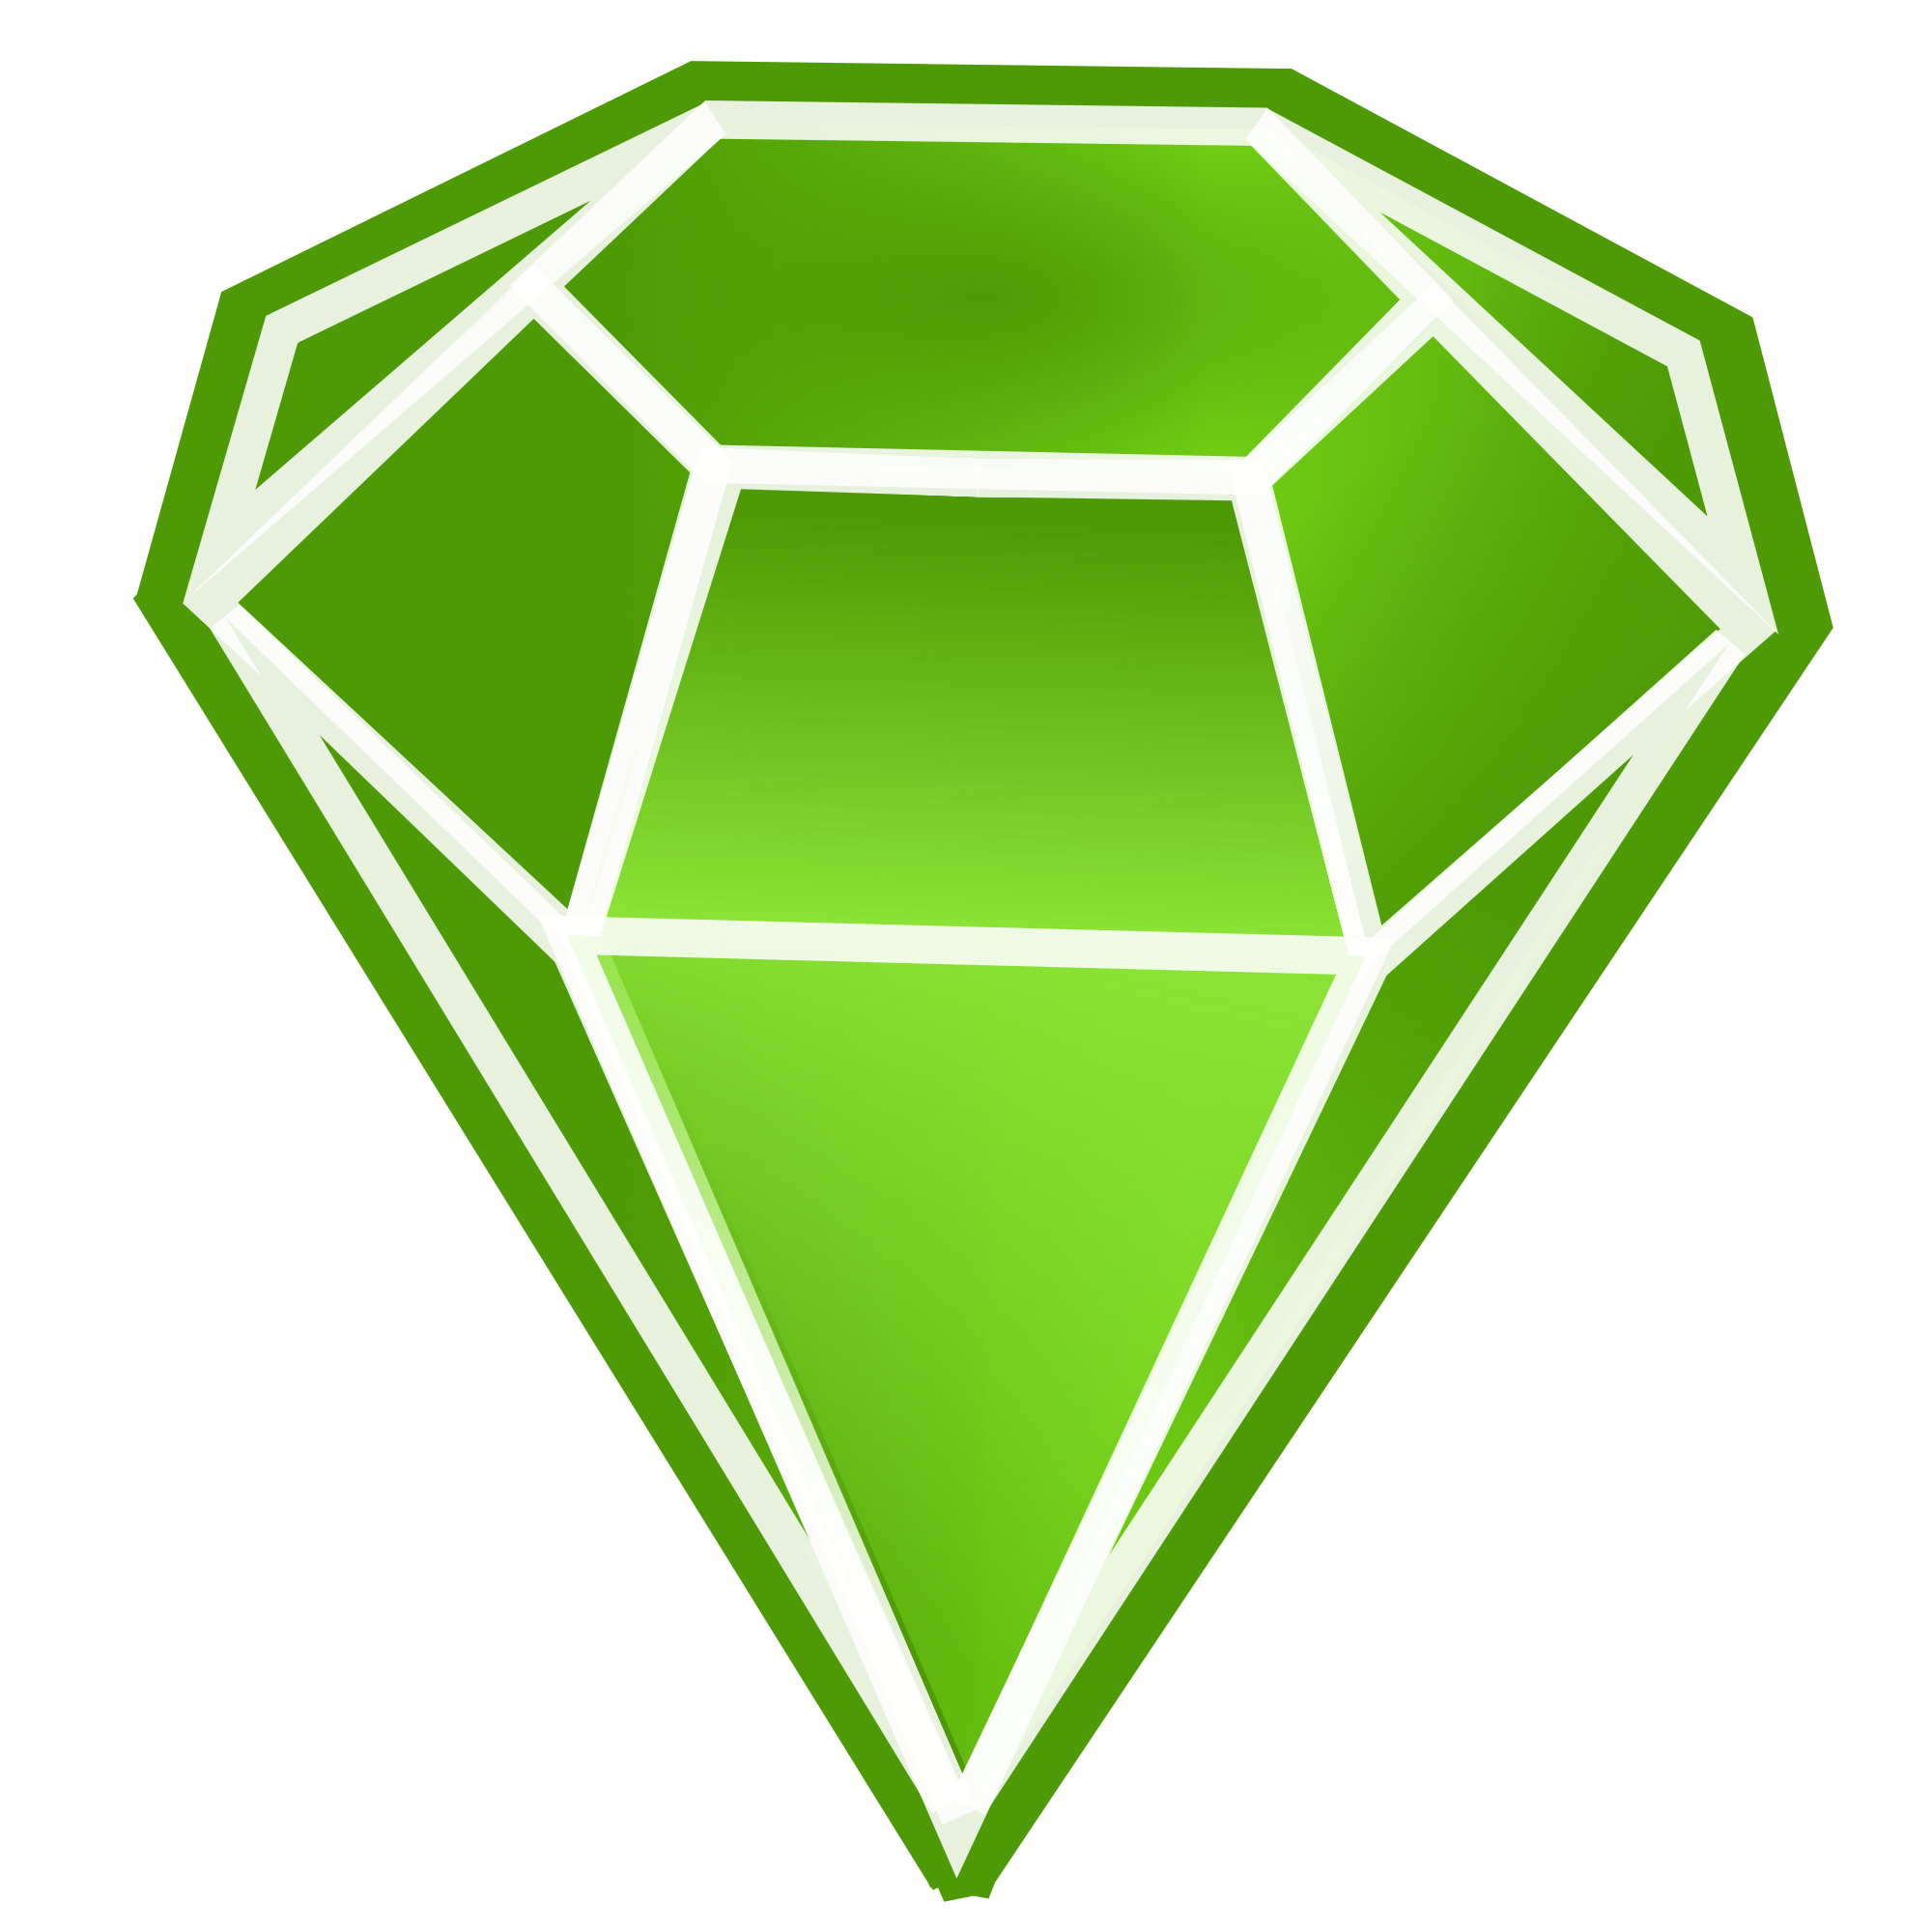 Emerald  Stone PNG Image